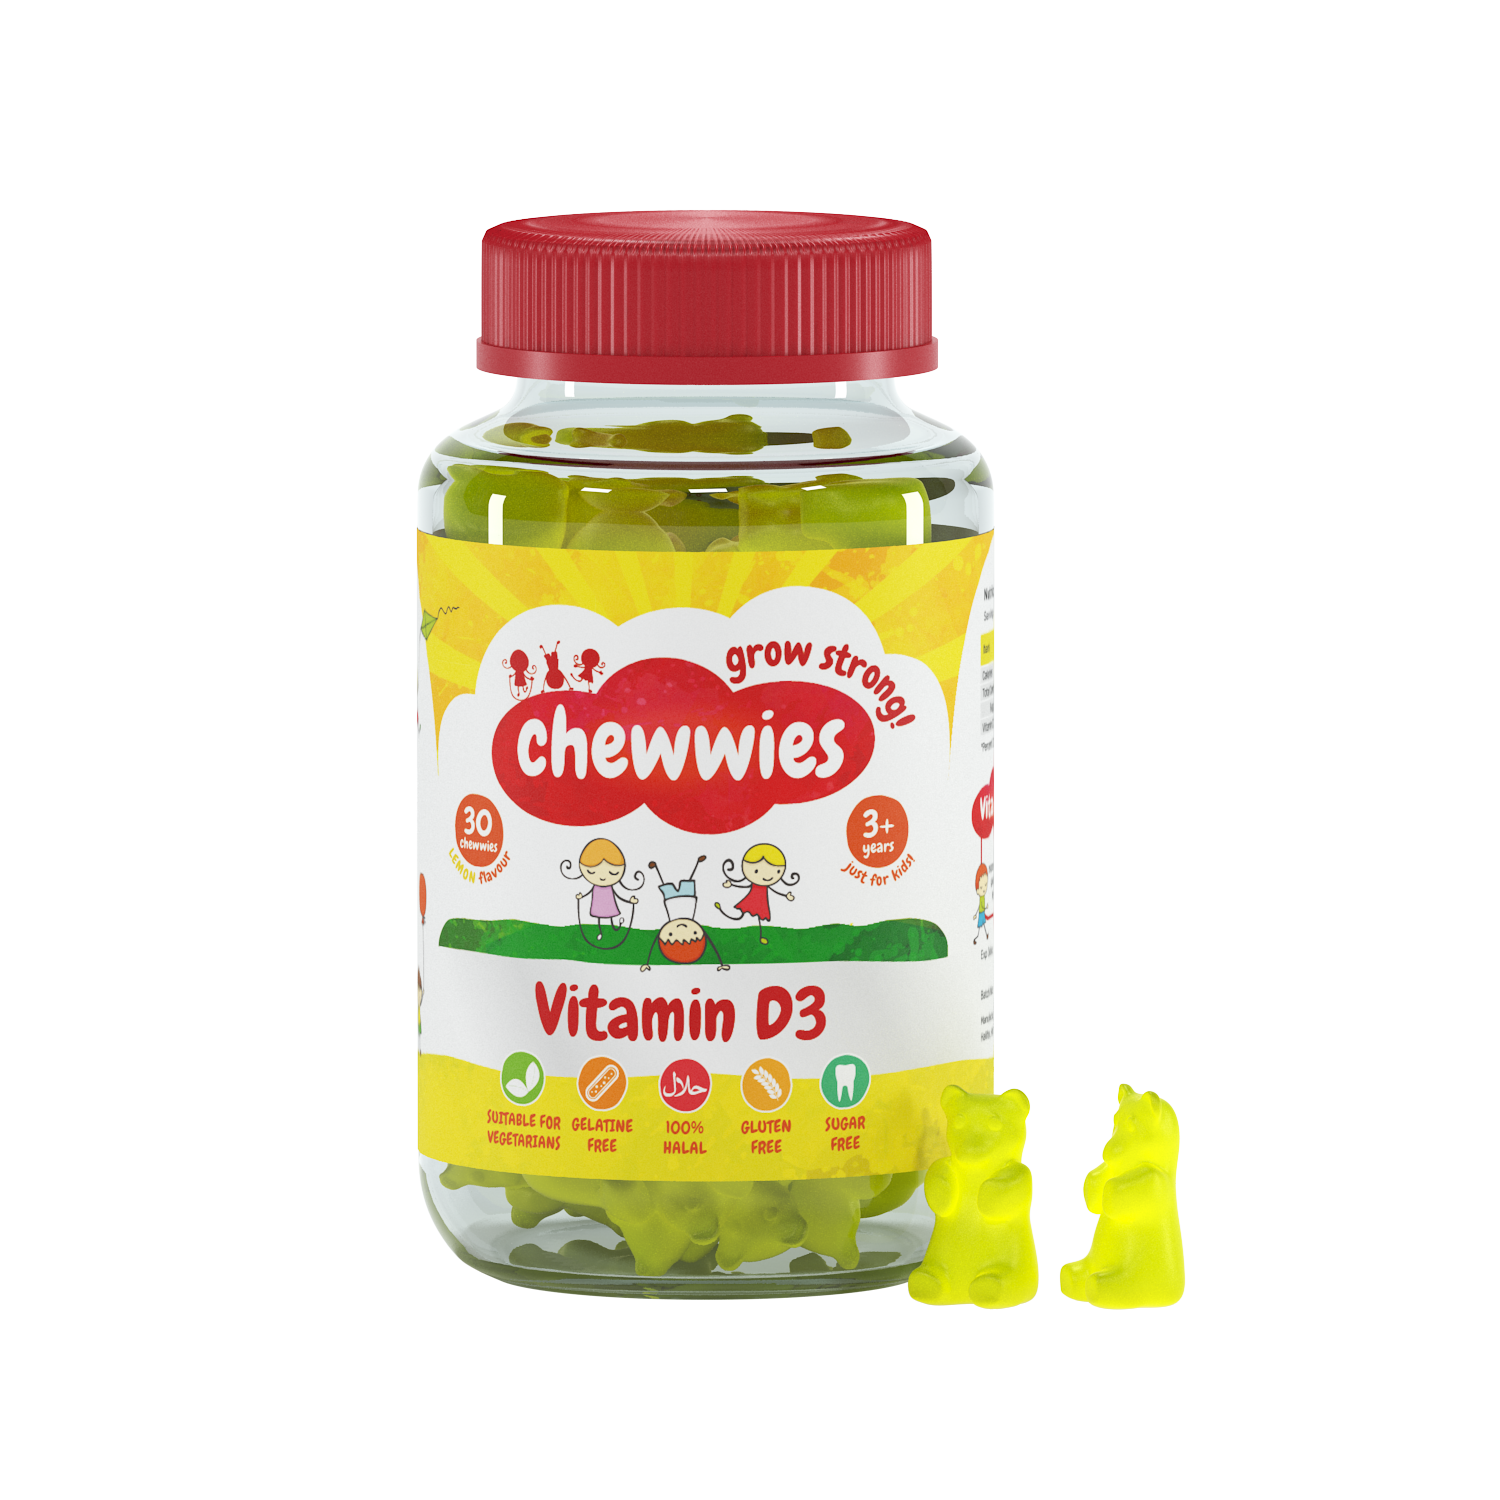 Chewwies Vitamin D3, 30 sugar-free, vegan gummies with citrus extracts to support healthy growth and development.